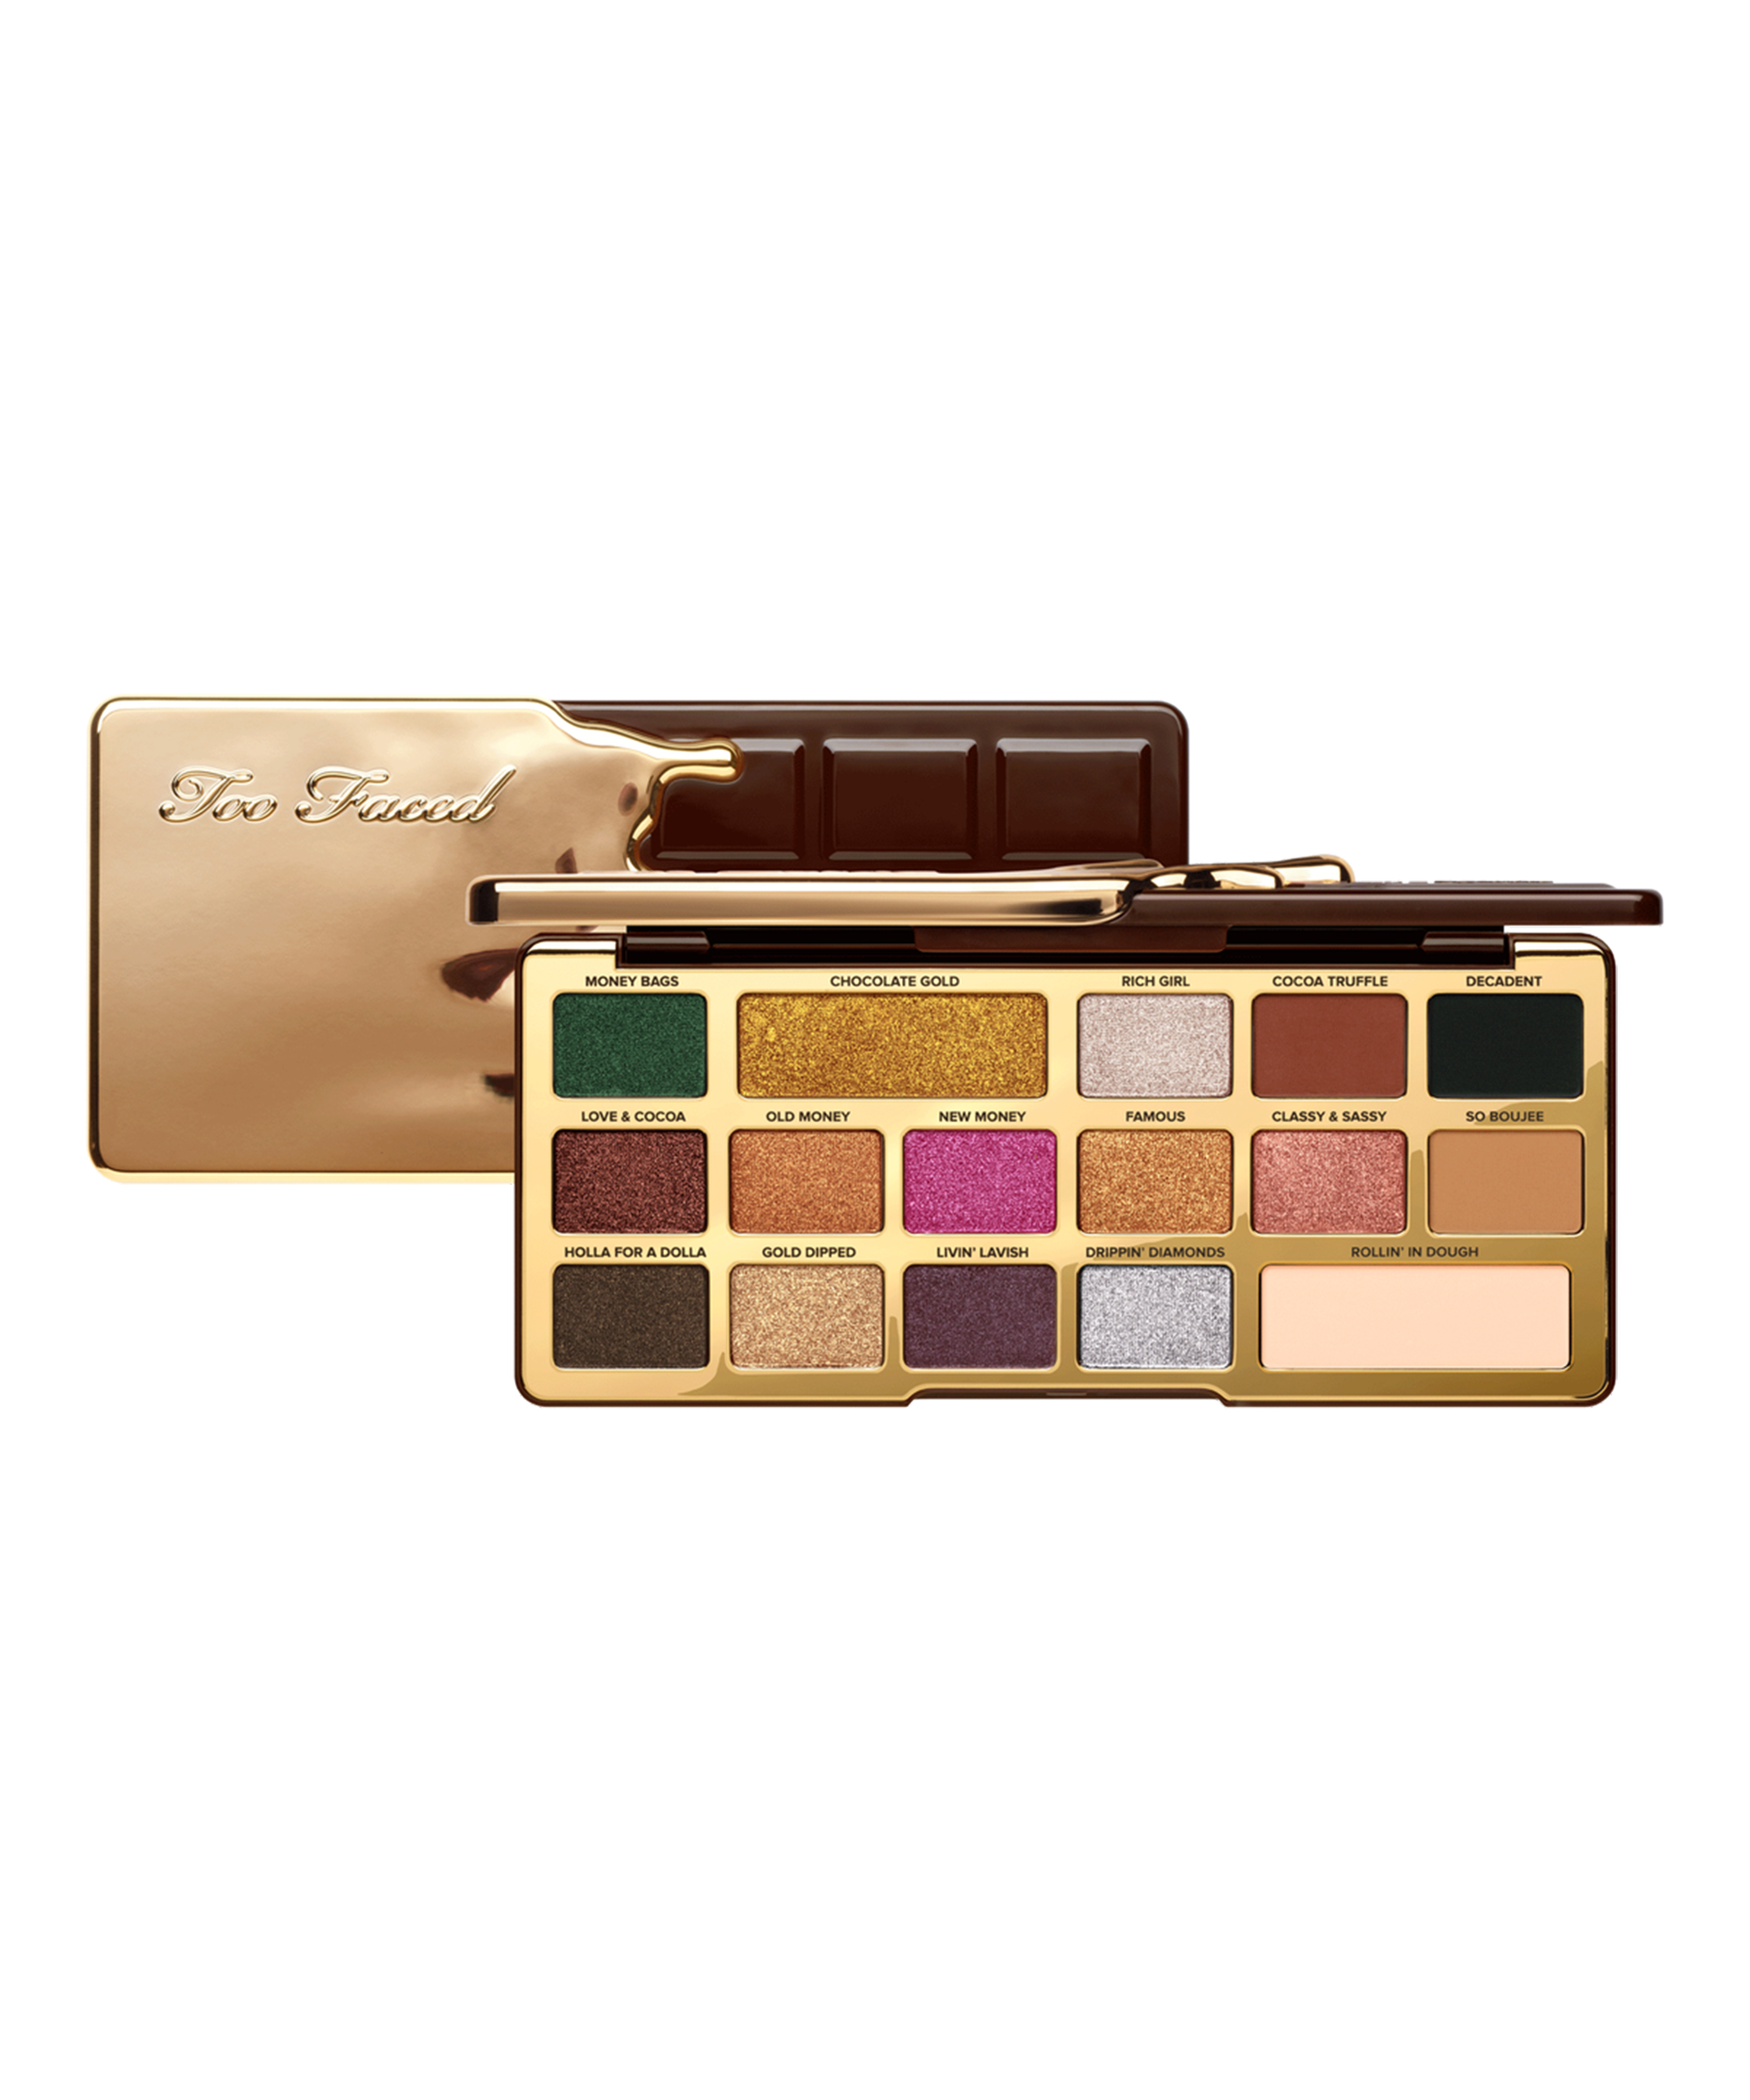 6 beauty palettes that will satisfy your holiday sweet tooth